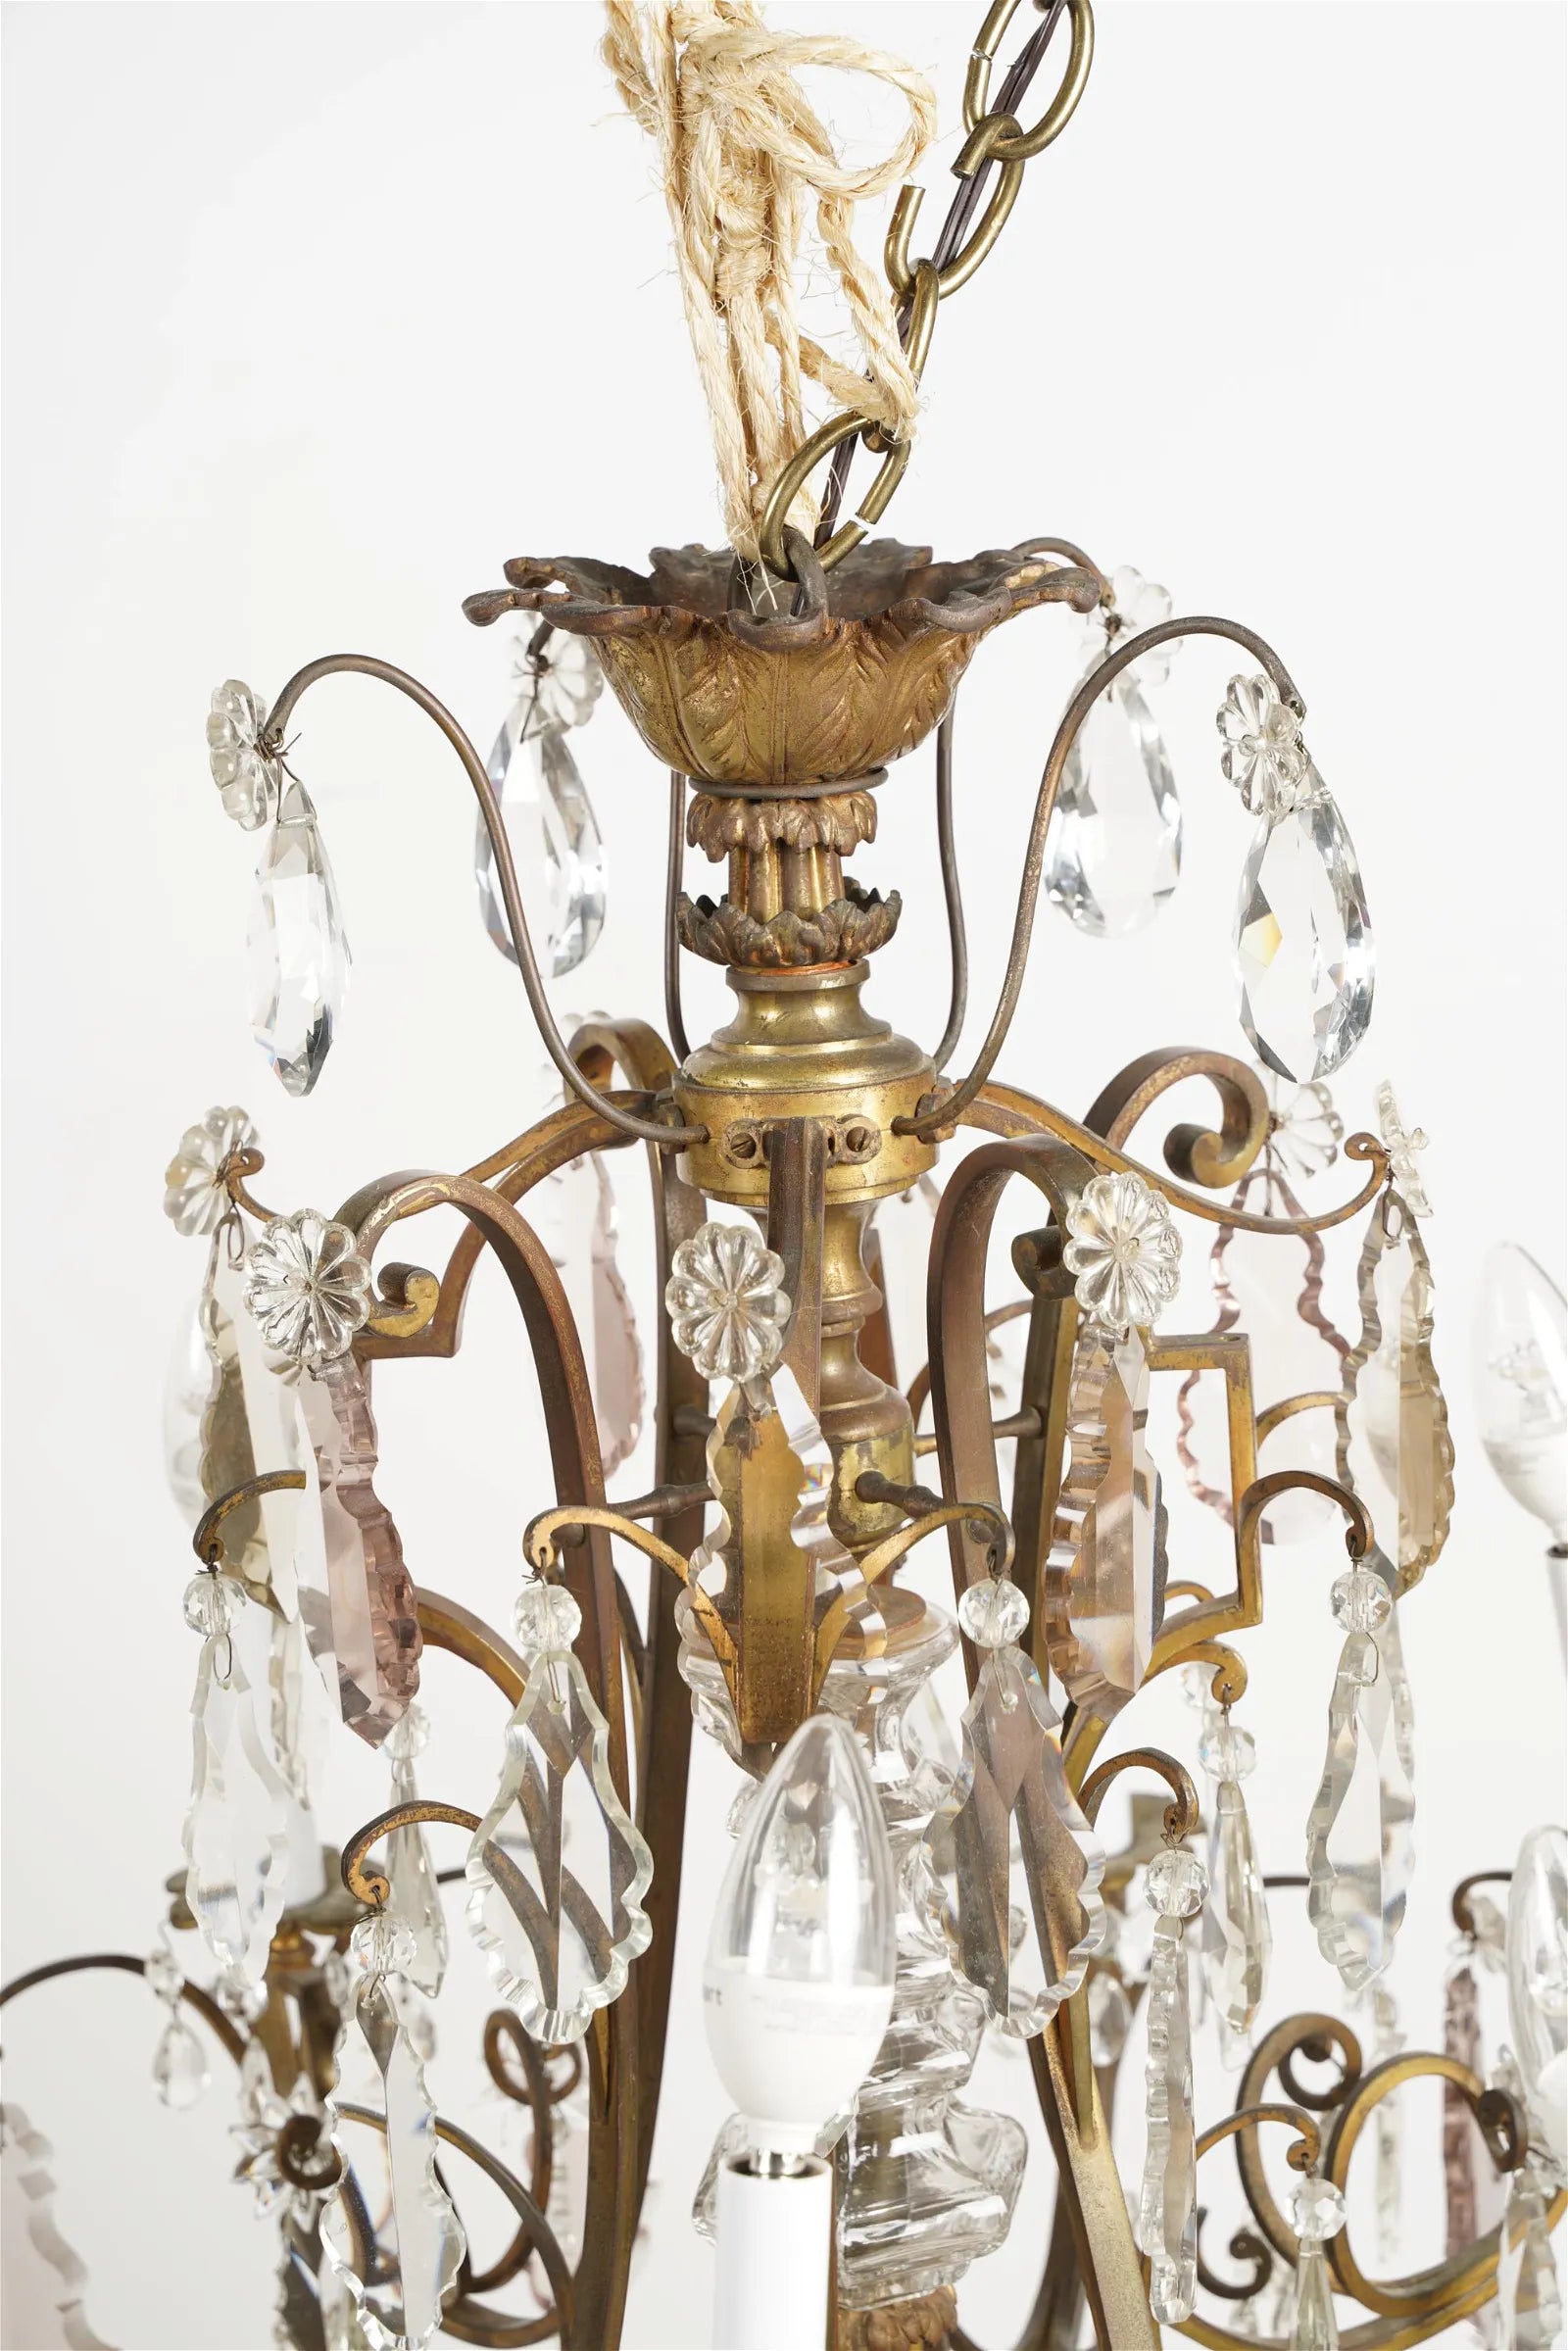 AL1-064: EARLY 20TH CENTURY FRENCH CRYSTAL & BRASS 8 LIGHT CHANDELIER